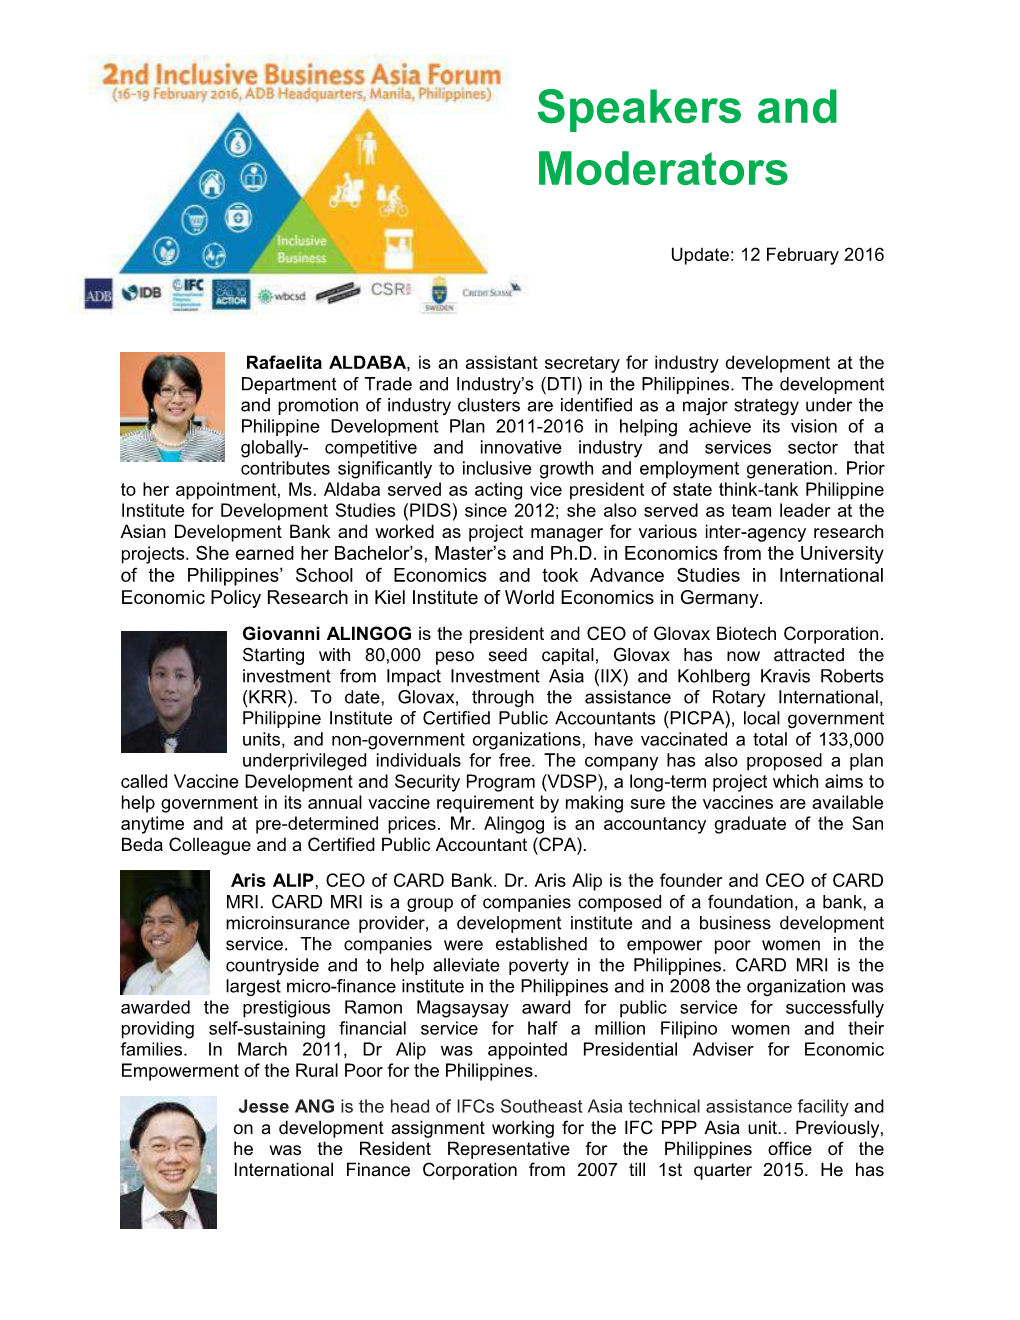 2Nd Inclusive Business Asia Forum: Speakers and Moderators